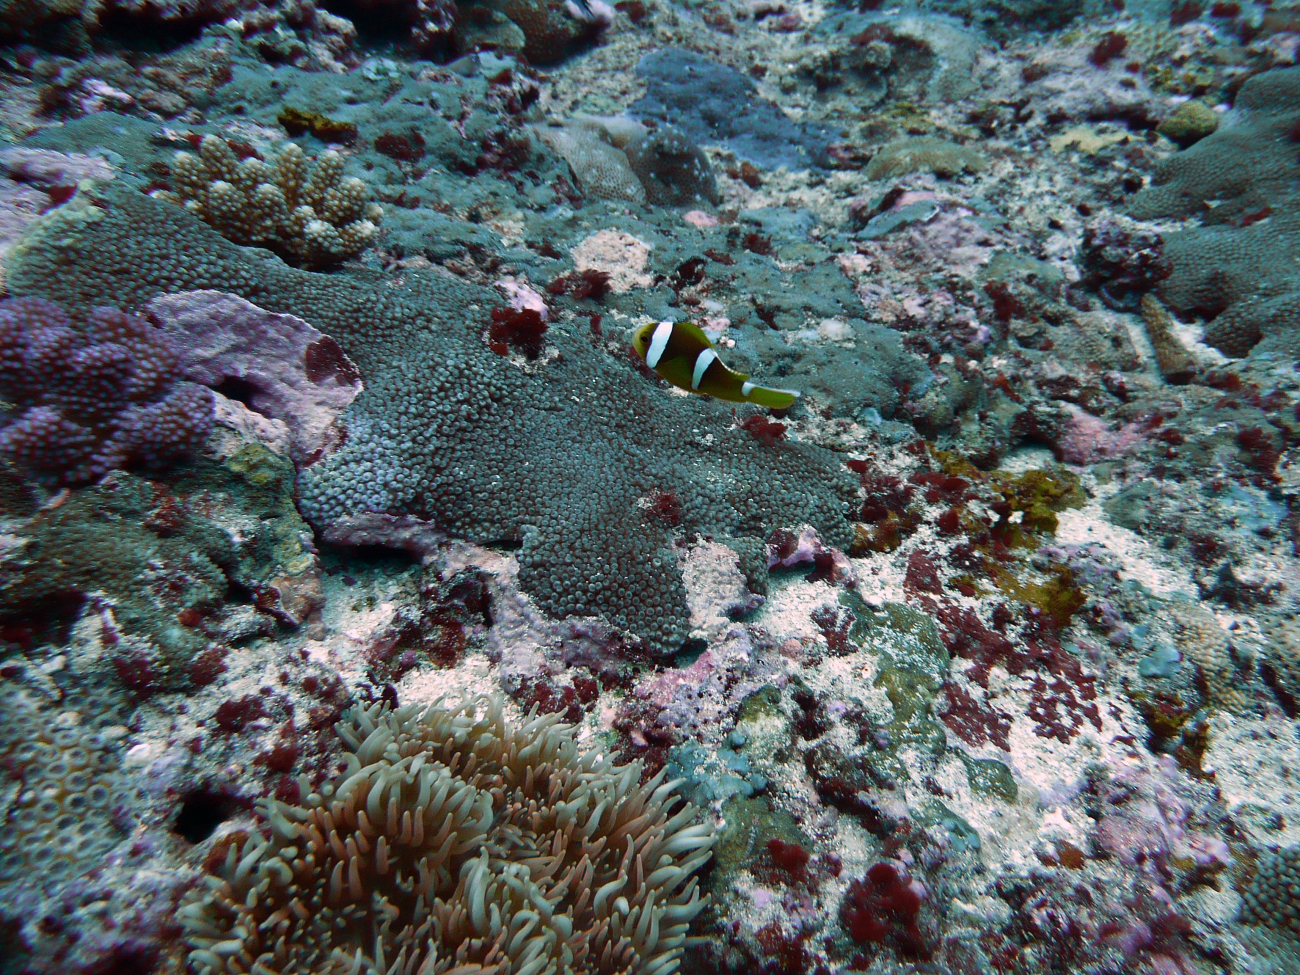 Clark's anemonefish (Amphiprion clarkii) over polyps of large anemone